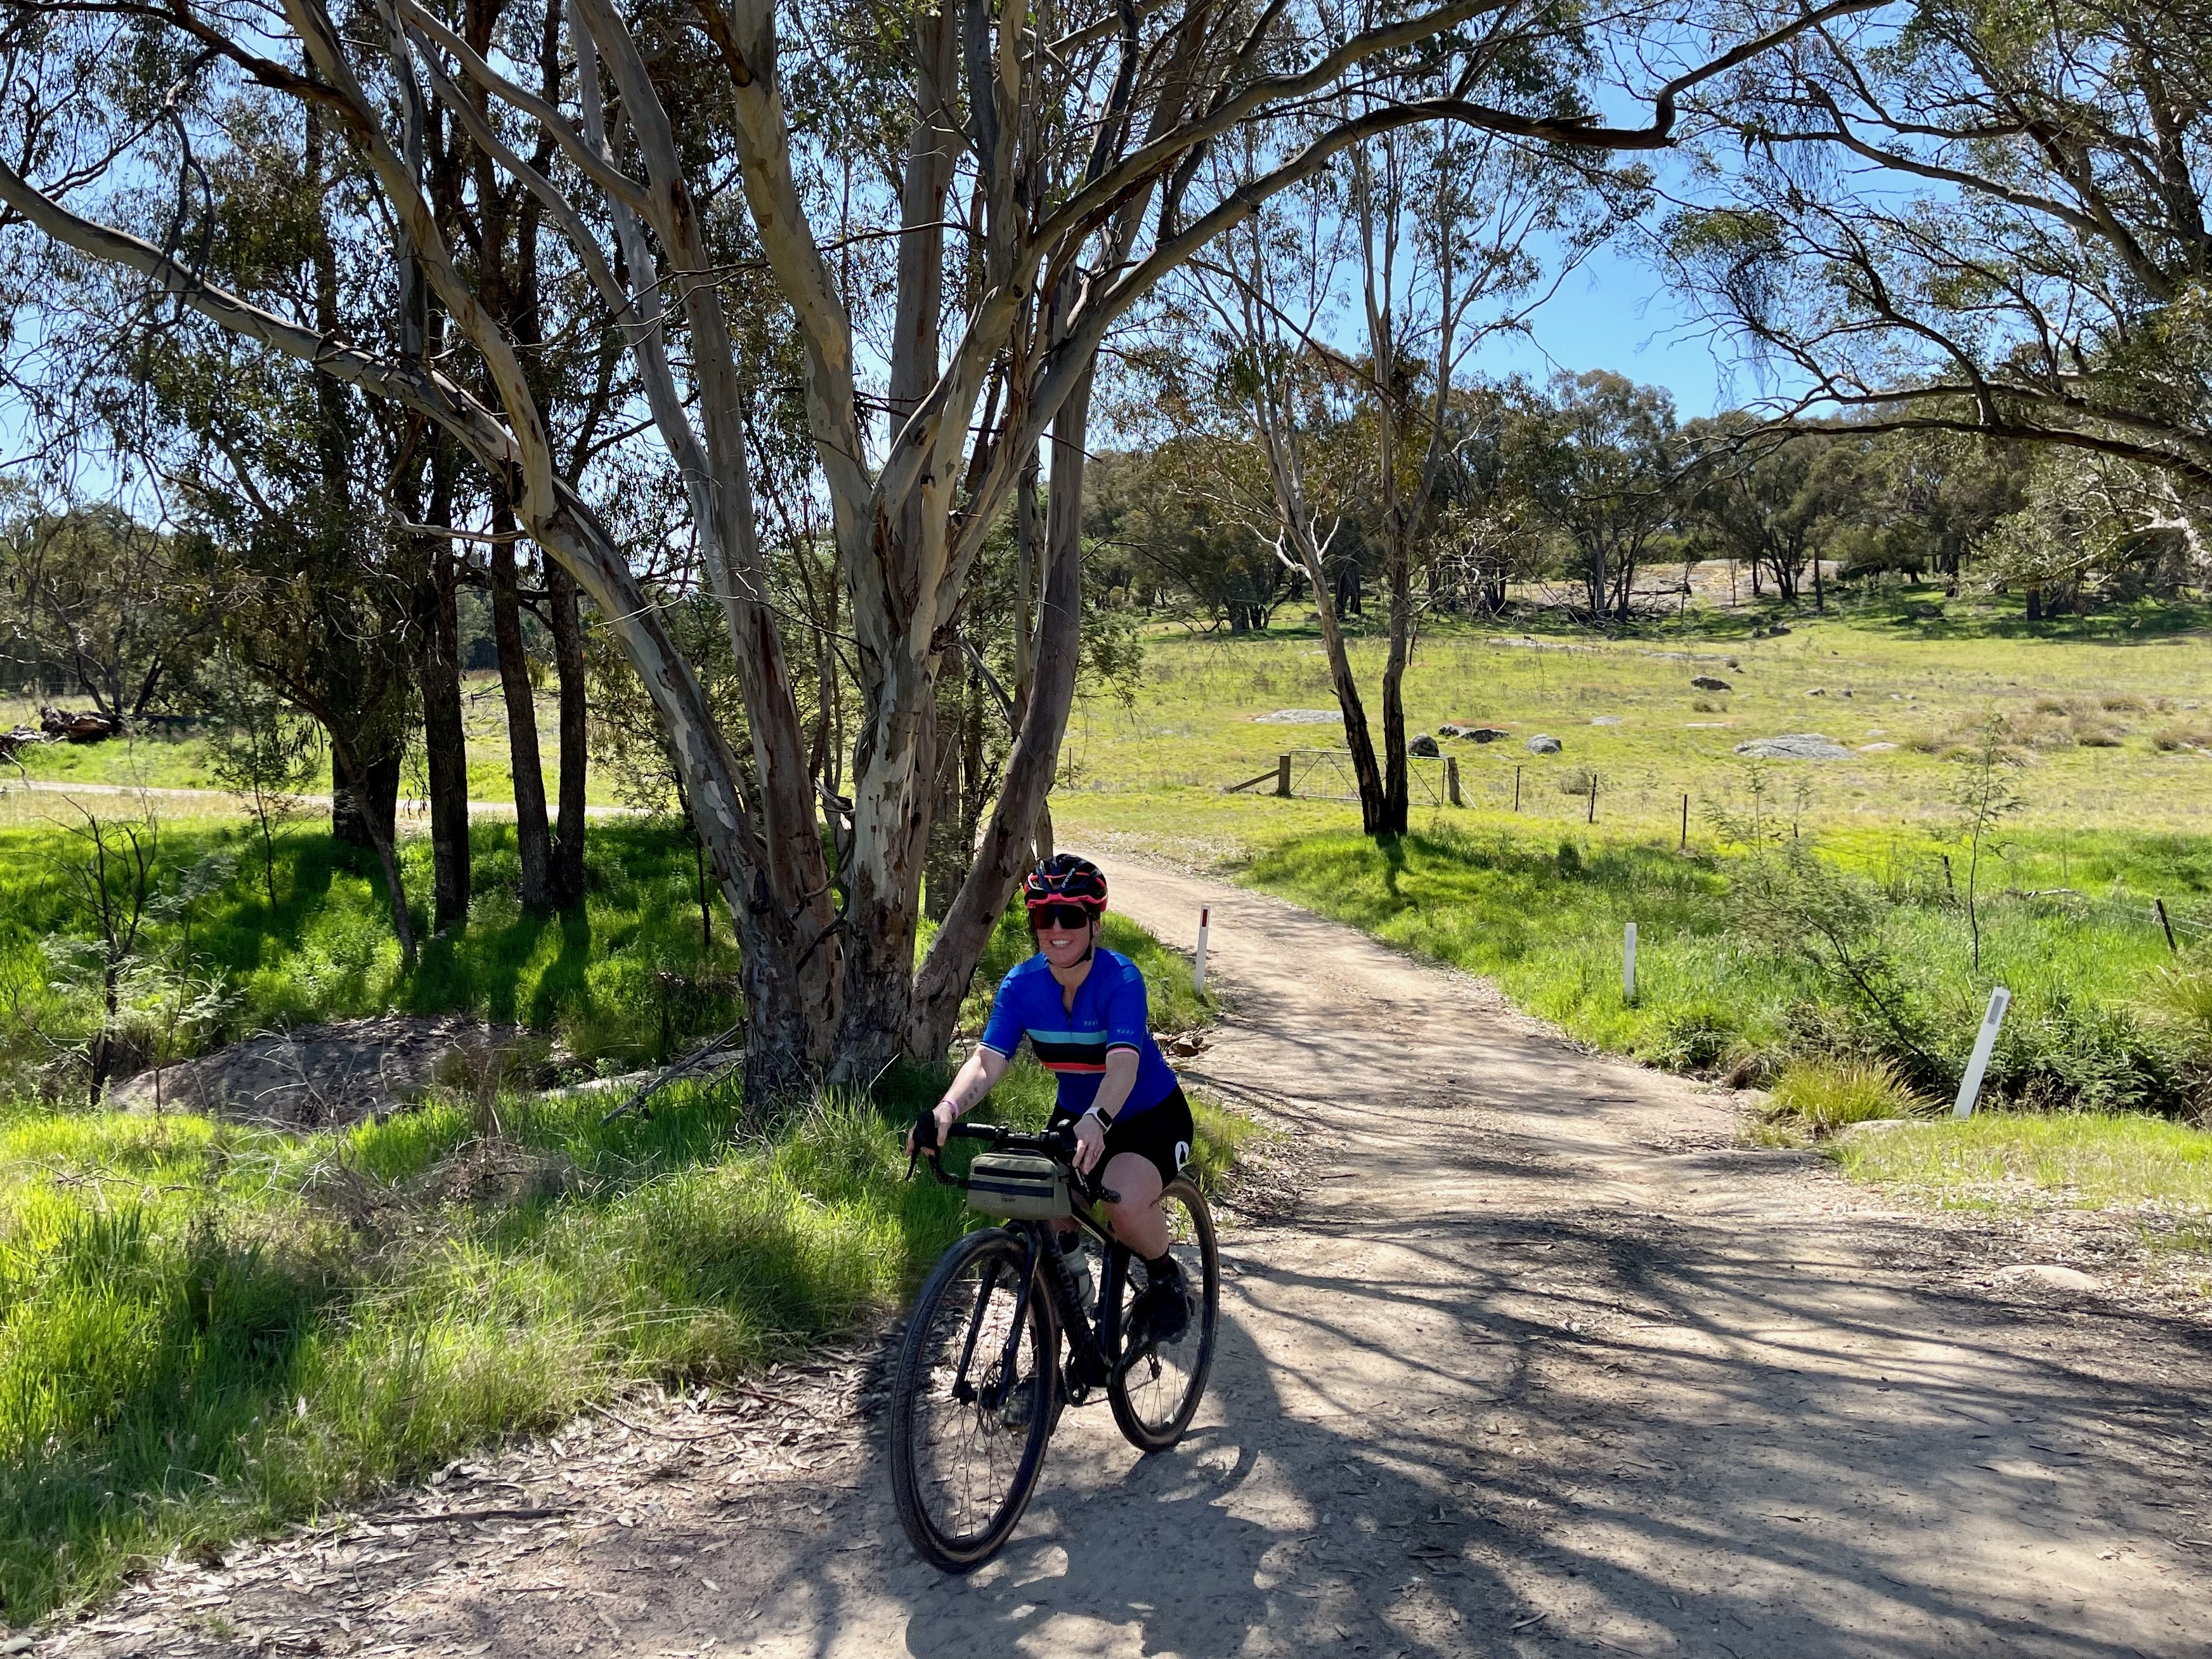 A female cyclist riding under blue skies on a smooth gravel road that is winding through open farmland and native bushland